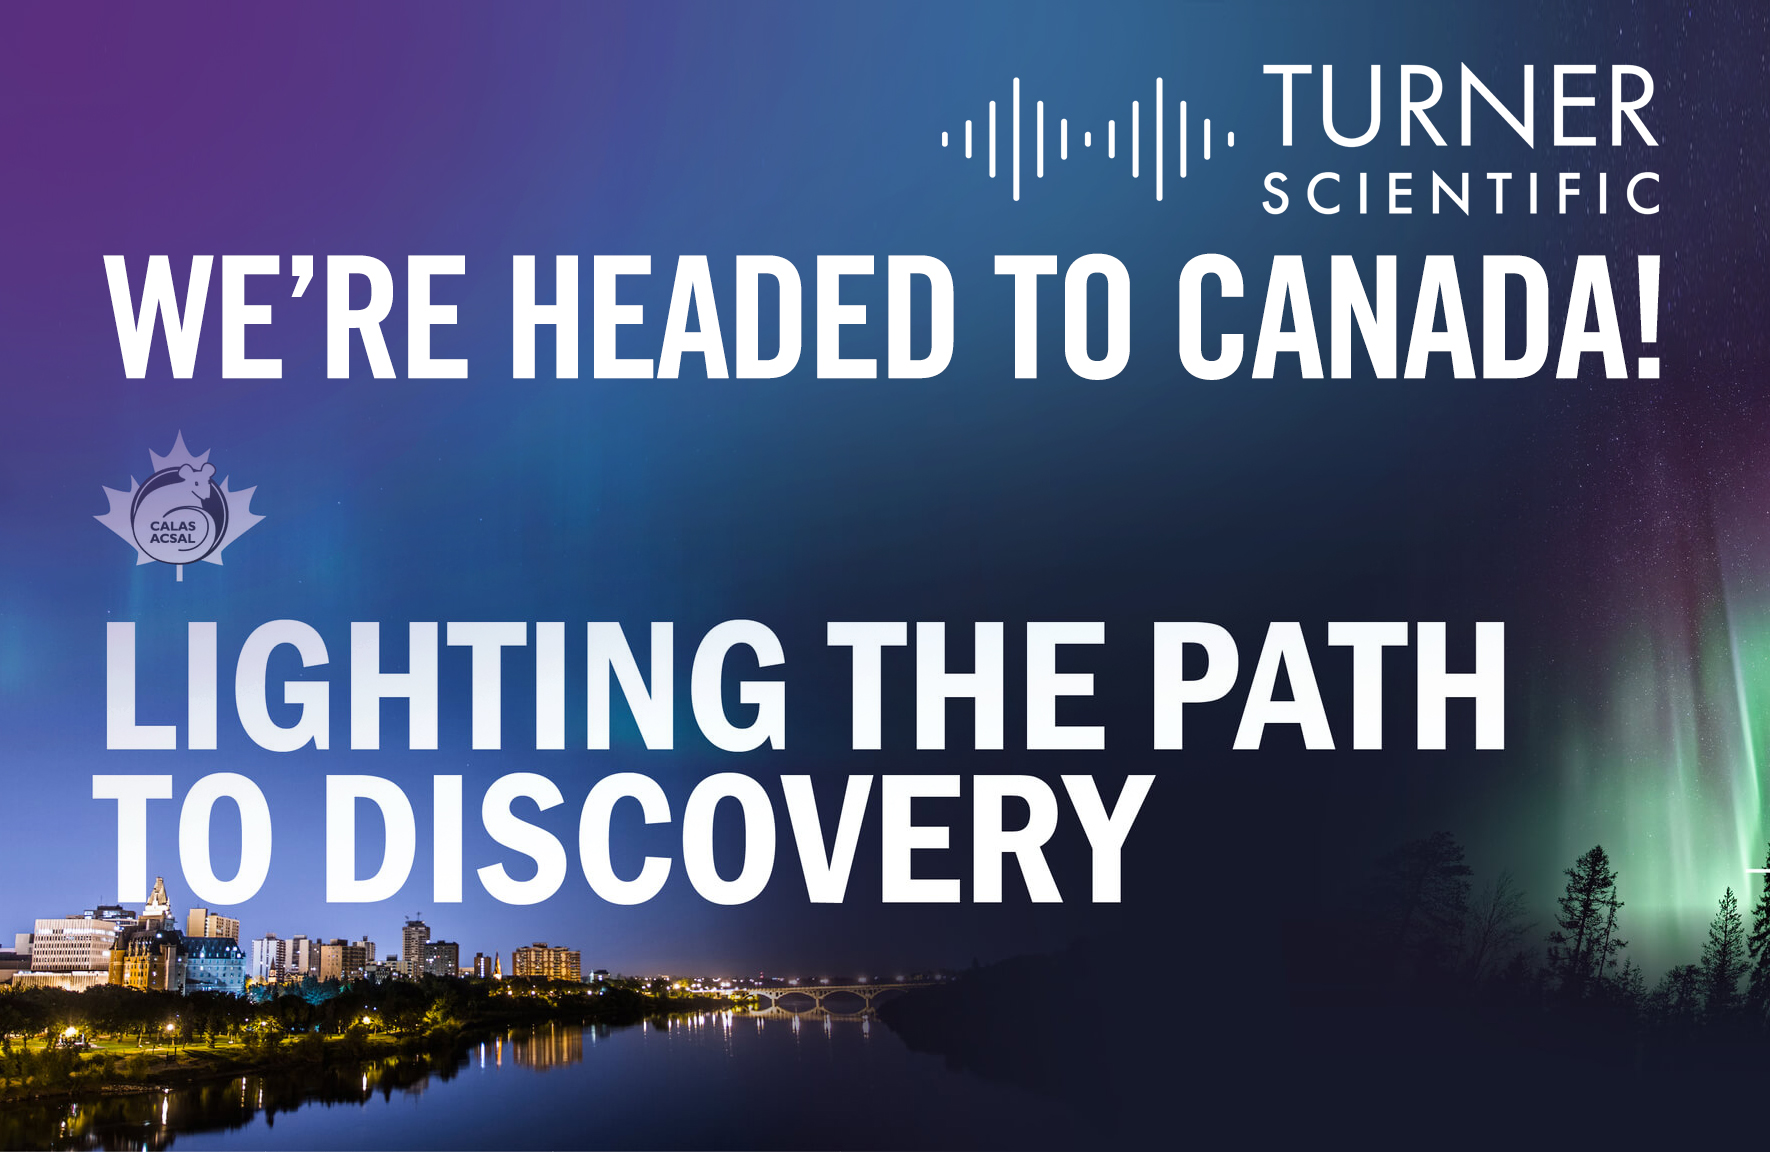 Turner Scientific is headed to Canada! 